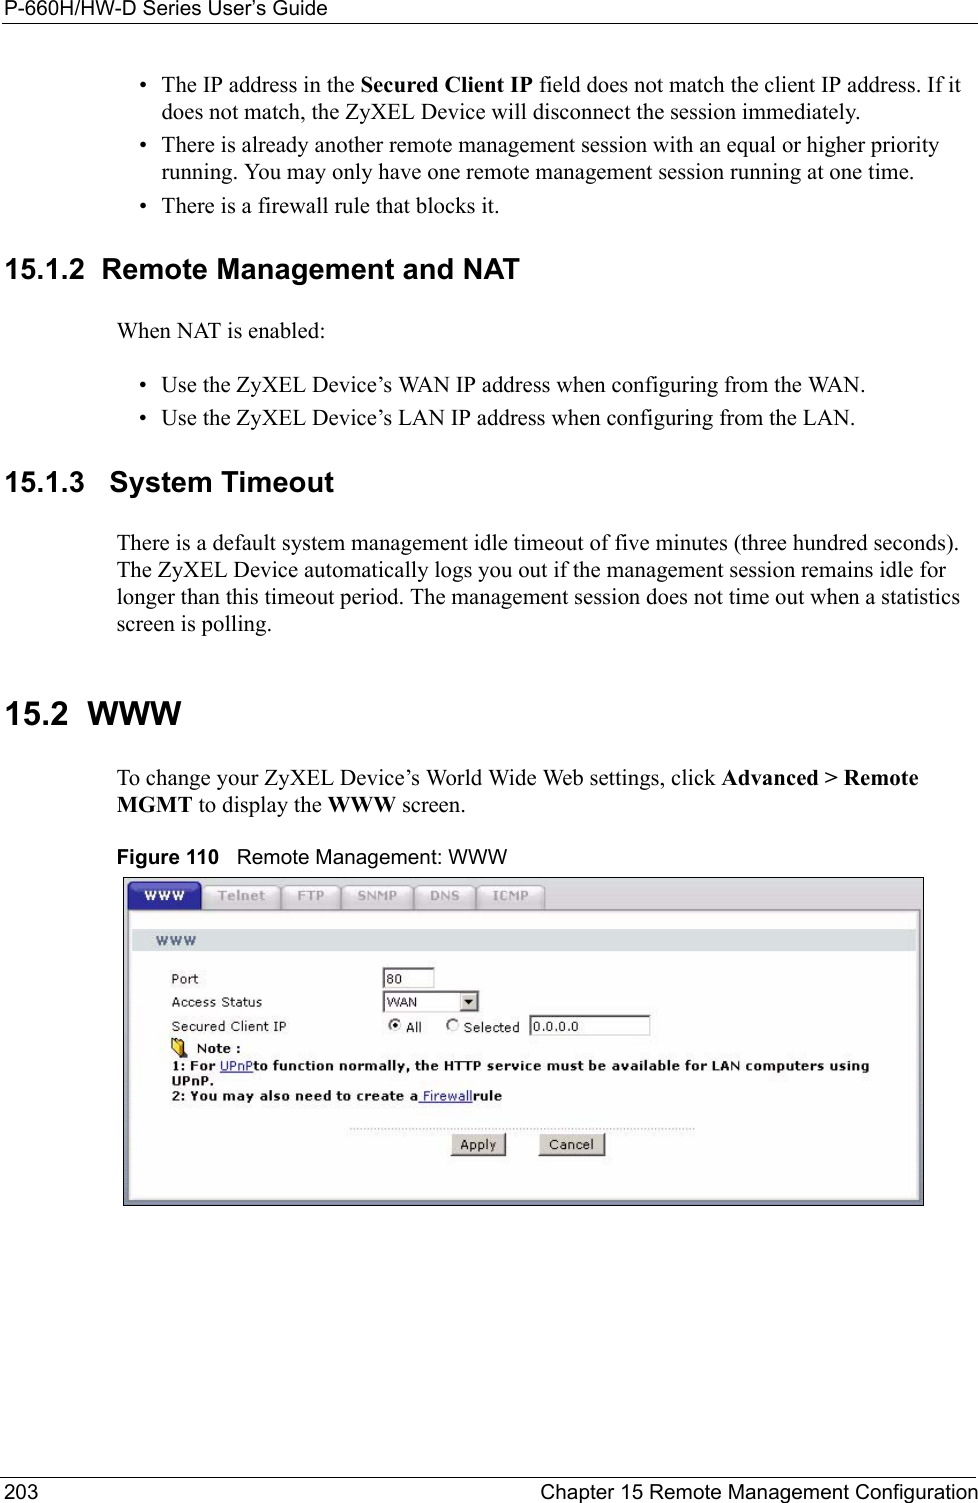 P-660H/HW-D Series User’s Guide203 Chapter 15 Remote Management Configuration• The IP address in the Secured Client IP field does not match the client IP address. If it does not match, the ZyXEL Device will disconnect the session immediately.• There is already another remote management session with an equal or higher priority running. You may only have one remote management session running at one time.• There is a firewall rule that blocks it.15.1.2  Remote Management and NATWhen NAT is enabled:• Use the ZyXEL Device’s WAN IP address when configuring from the WAN. • Use the ZyXEL Device’s LAN IP address when configuring from the LAN.15.1.3   System TimeoutThere is a default system management idle timeout of five minutes (three hundred seconds). The ZyXEL Device automatically logs you out if the management session remains idle for longer than this timeout period. The management session does not time out when a statistics screen is polling. 15.2  WWWTo change your ZyXEL Device’s World Wide Web settings, click Advanced &gt; Remote MGMT to display the WWW screen.Figure 110   Remote Management: WWW